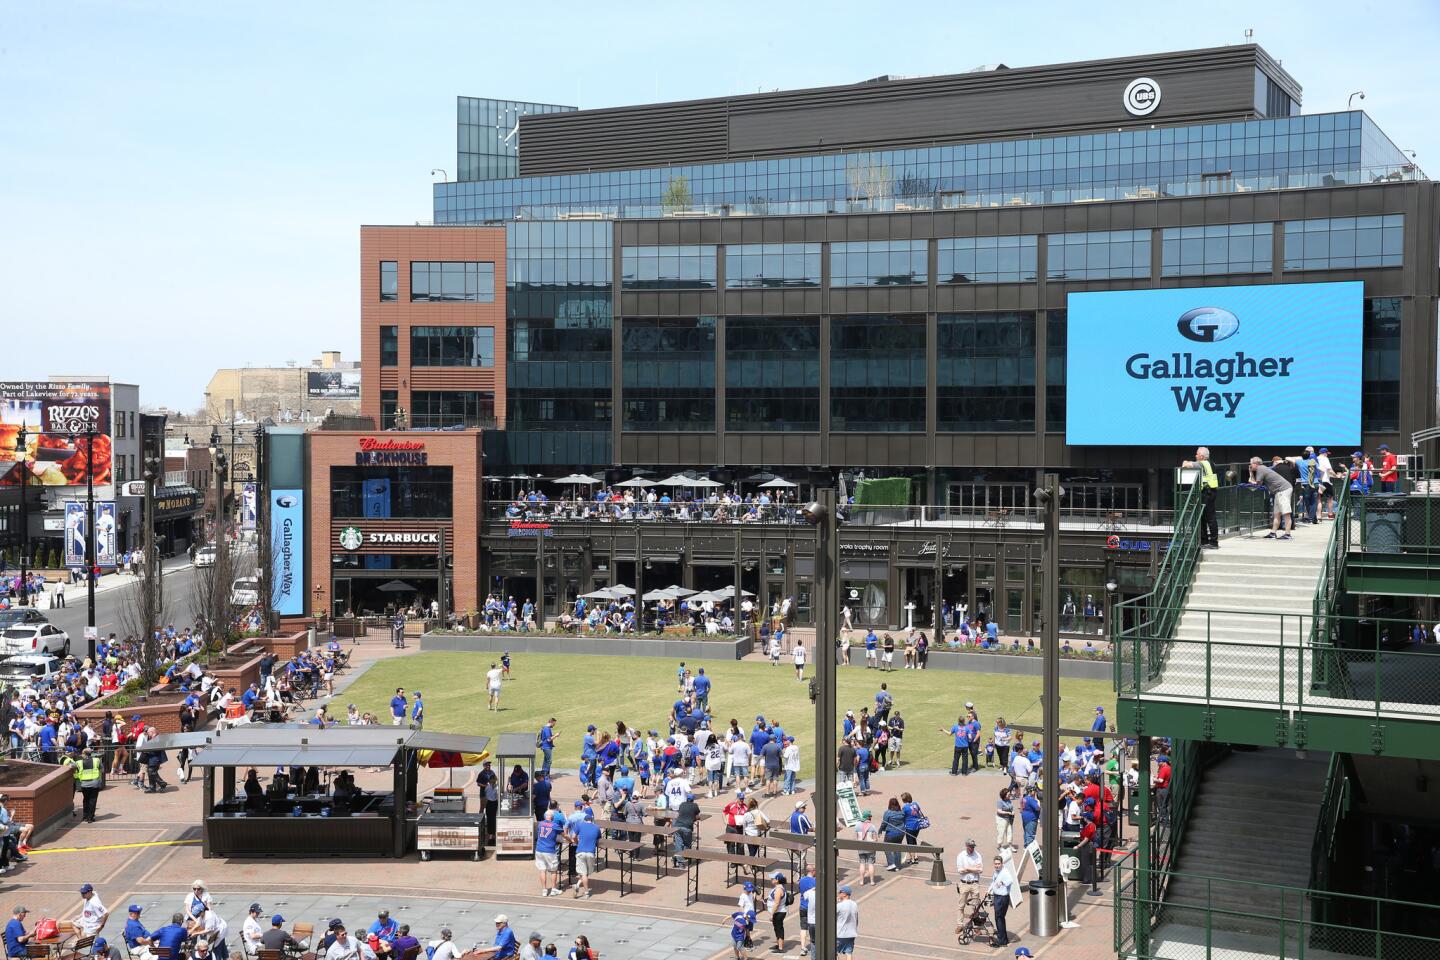 New name for Park at Wrigley: Gallagher Way